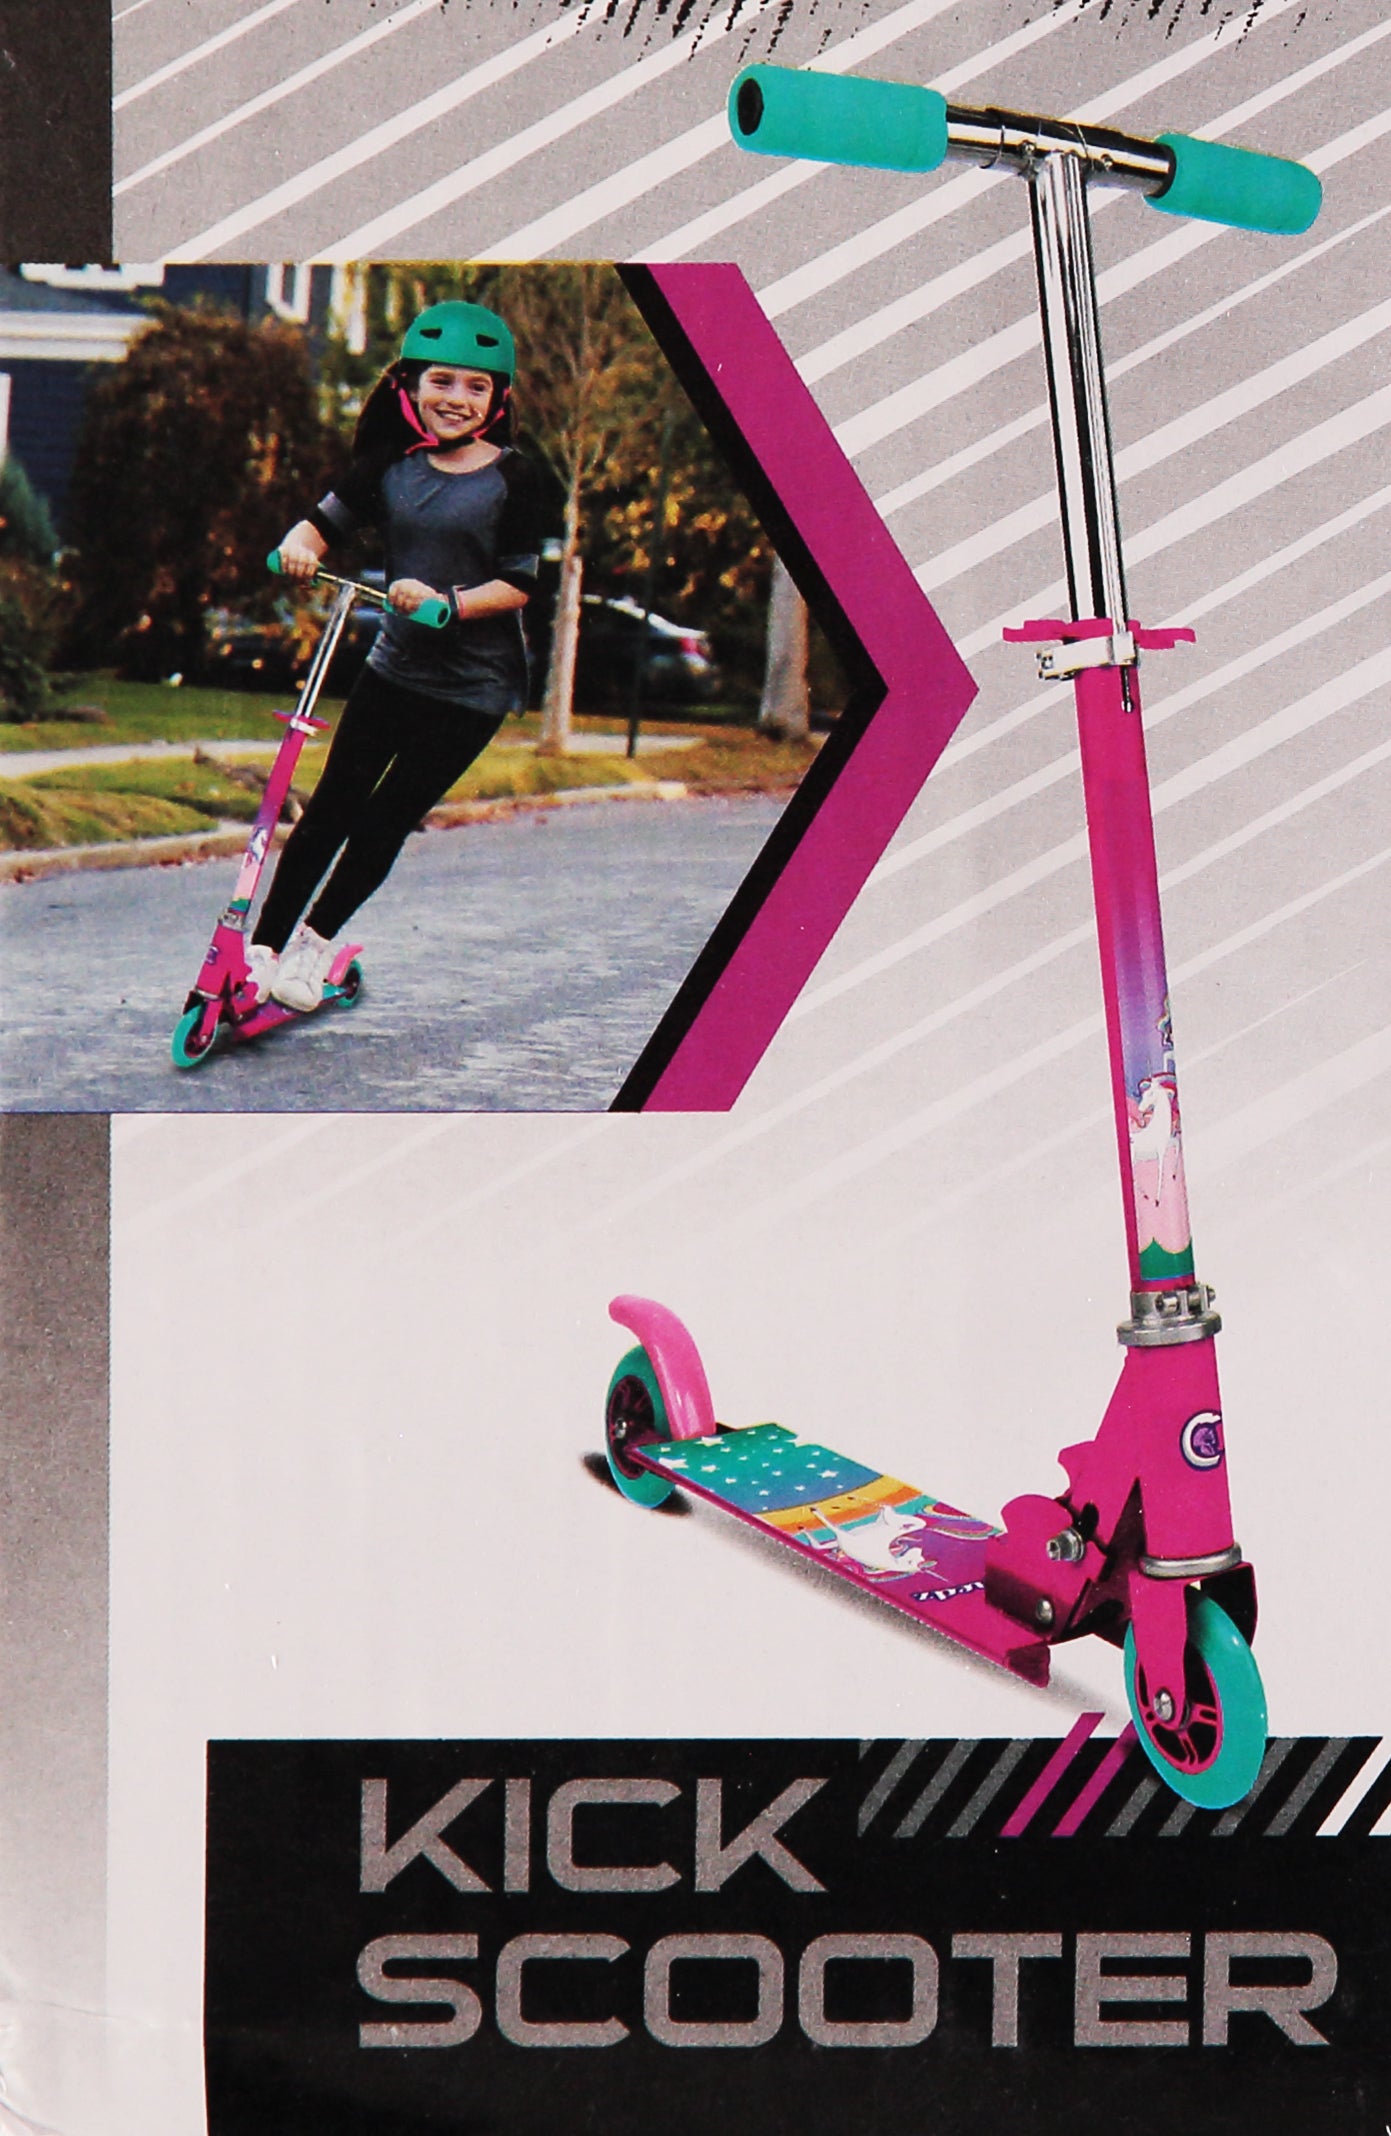 CredHedz Kids Kick Scooter with Portable Folding Design